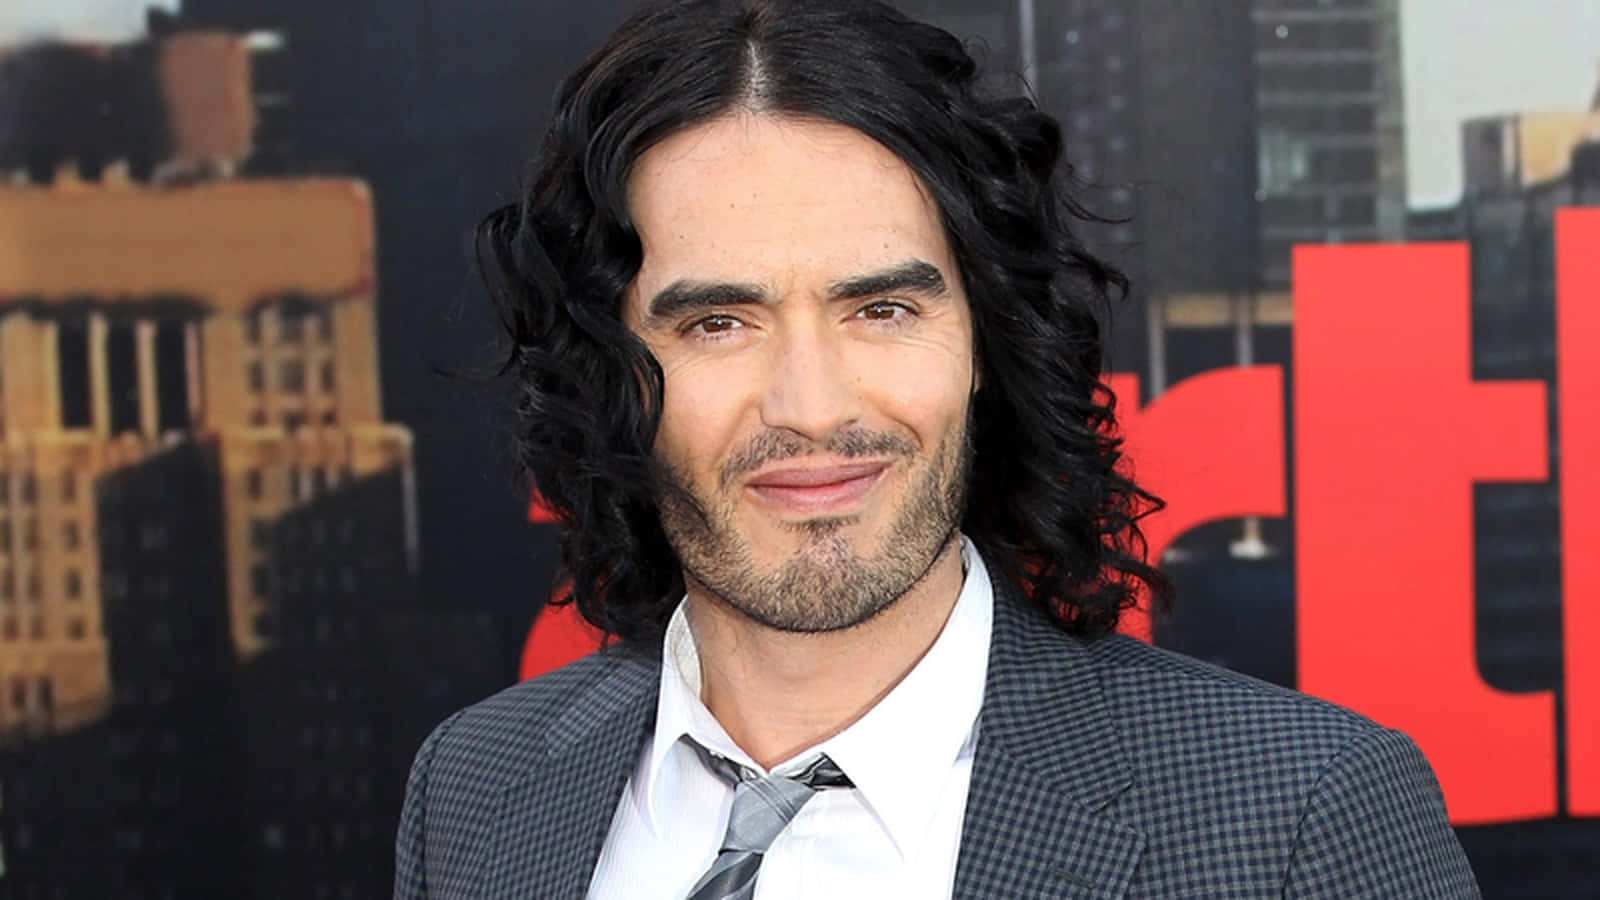 Russell Brand in contemplation Wallpaper